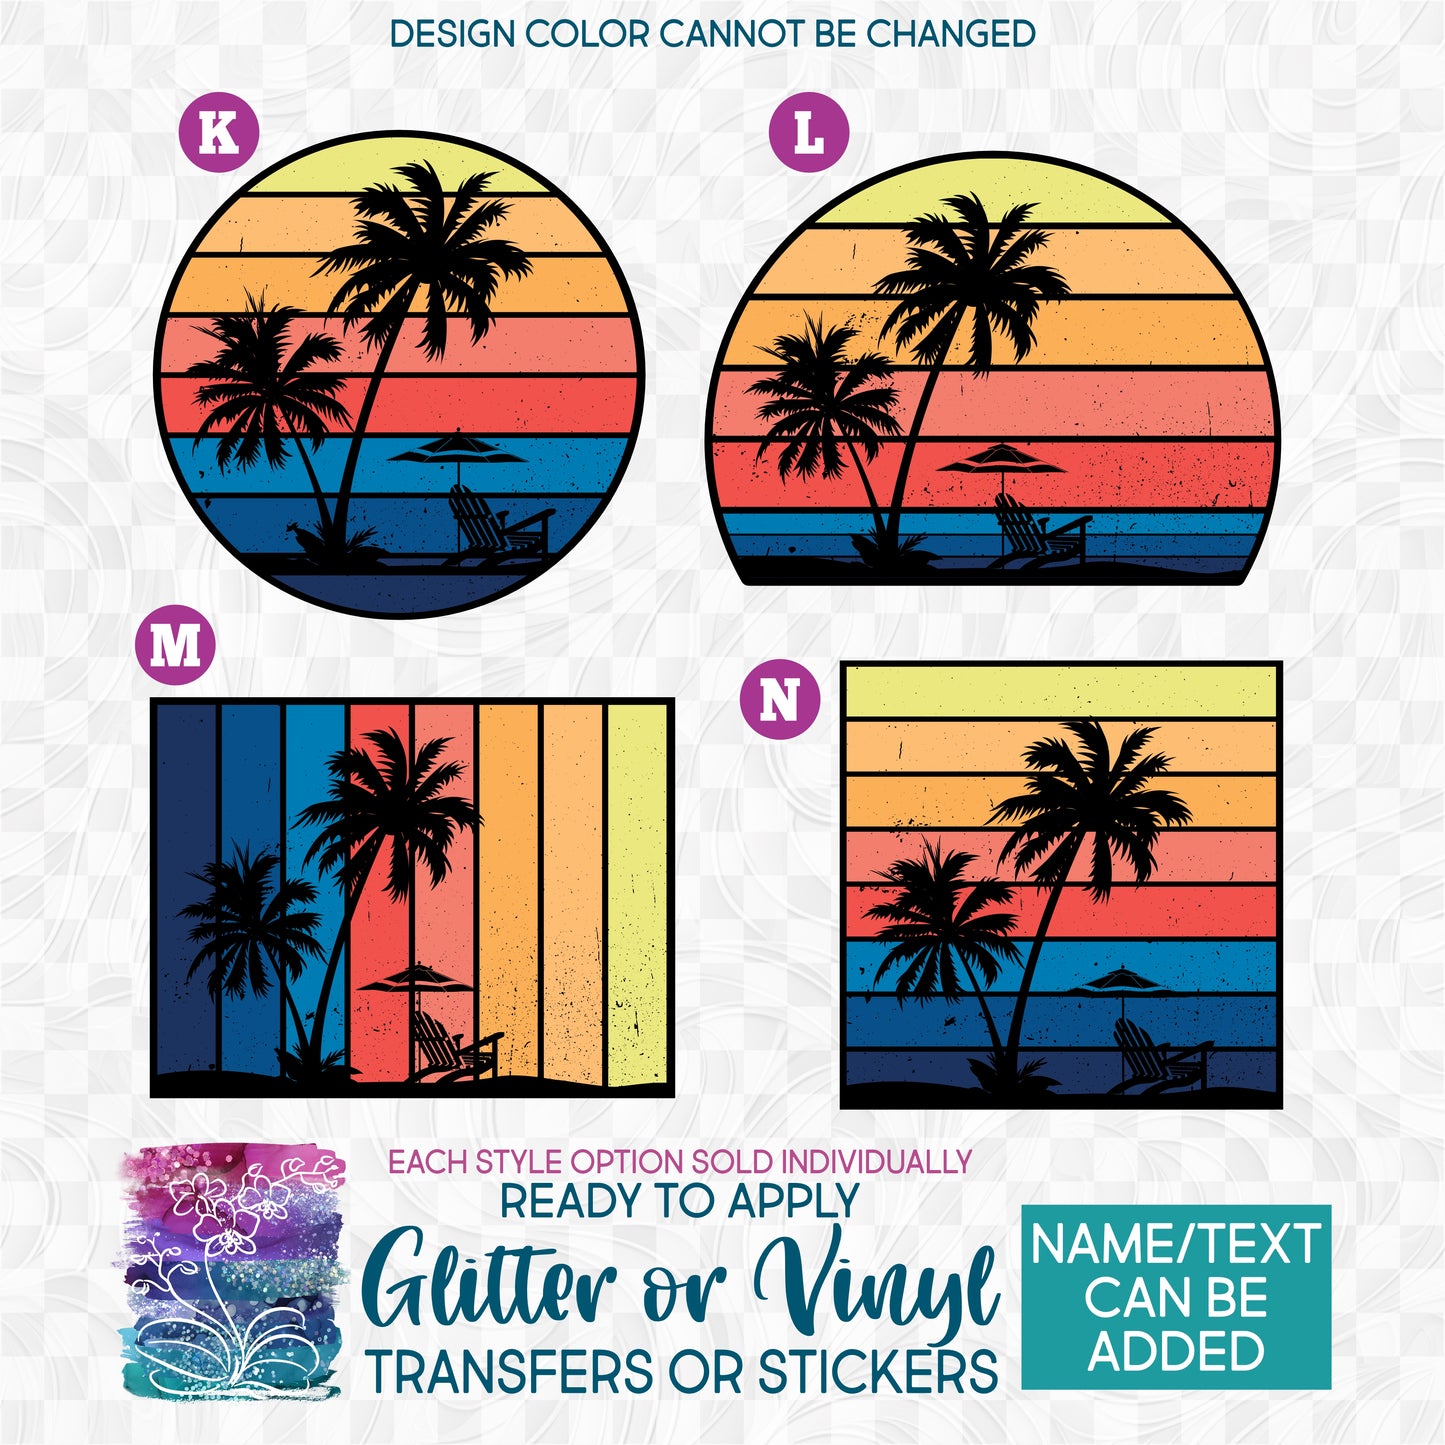 SBS-117-B Retro Sunset Tropical Palm Trees Beach Chair Made-to-Order Iron-On Transfer or Sticker